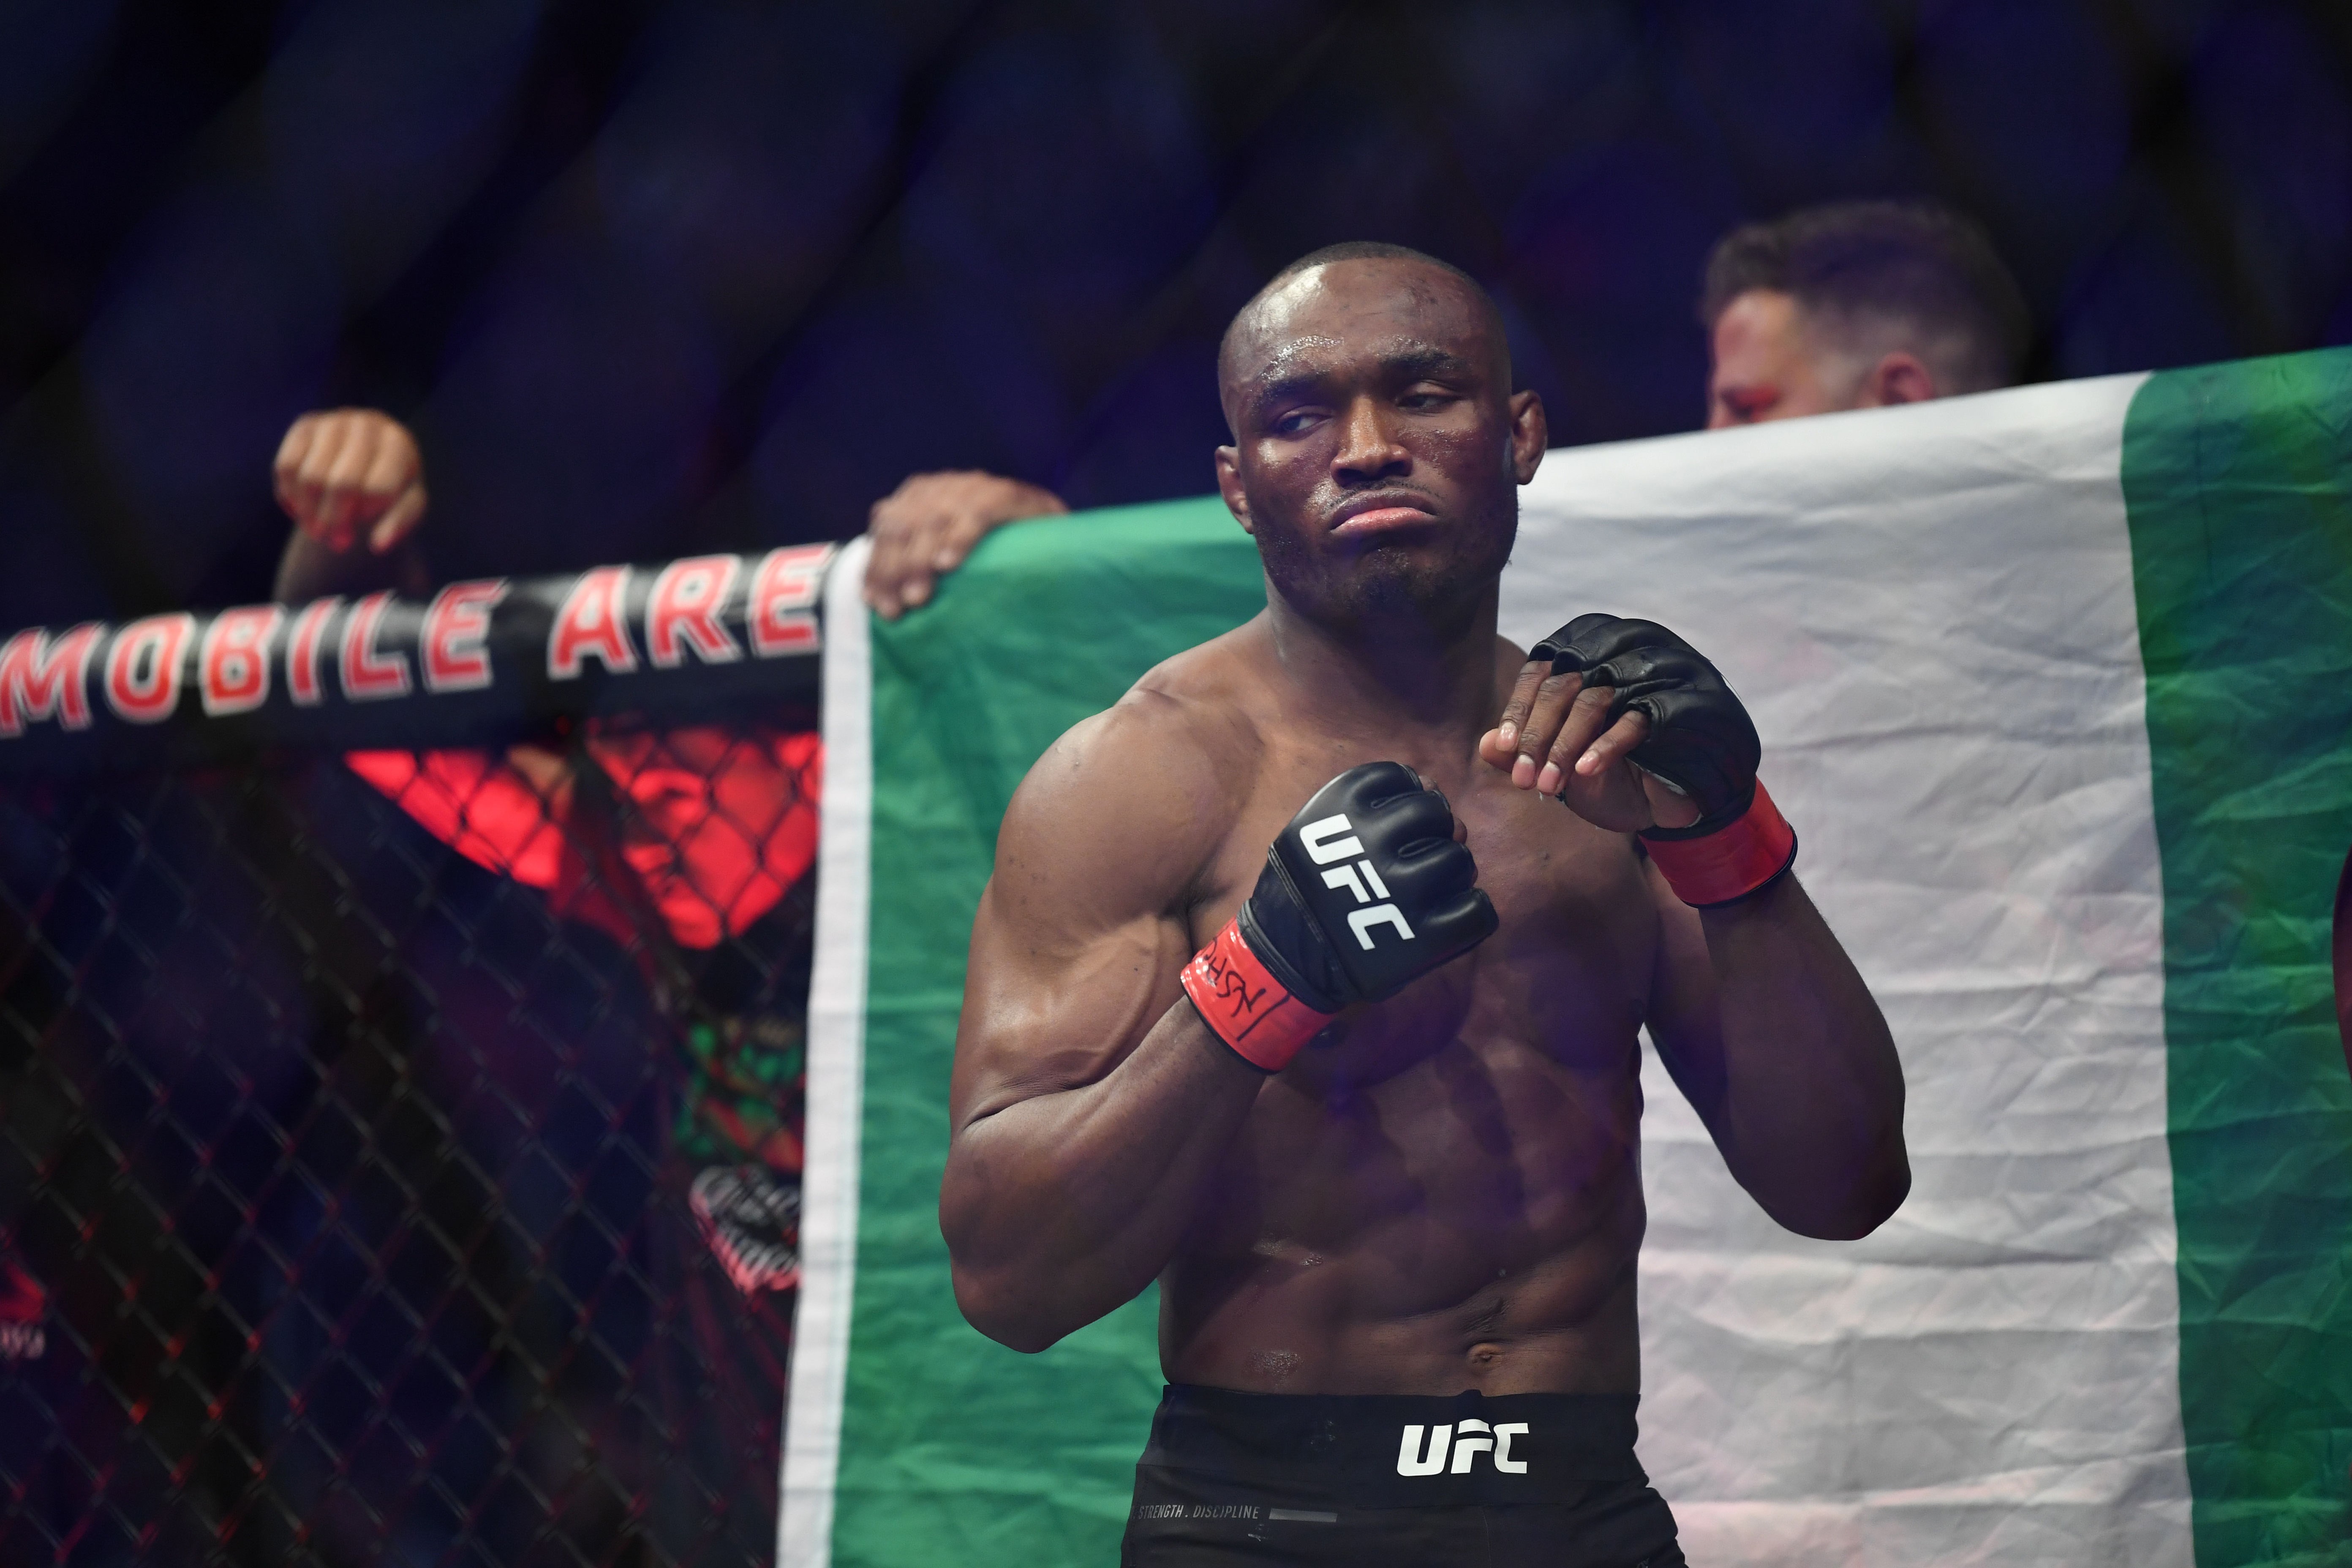 Kamaru Usman ahead of his fight against Colby Covington at UFC 245. Photo: USA TODAY Sports